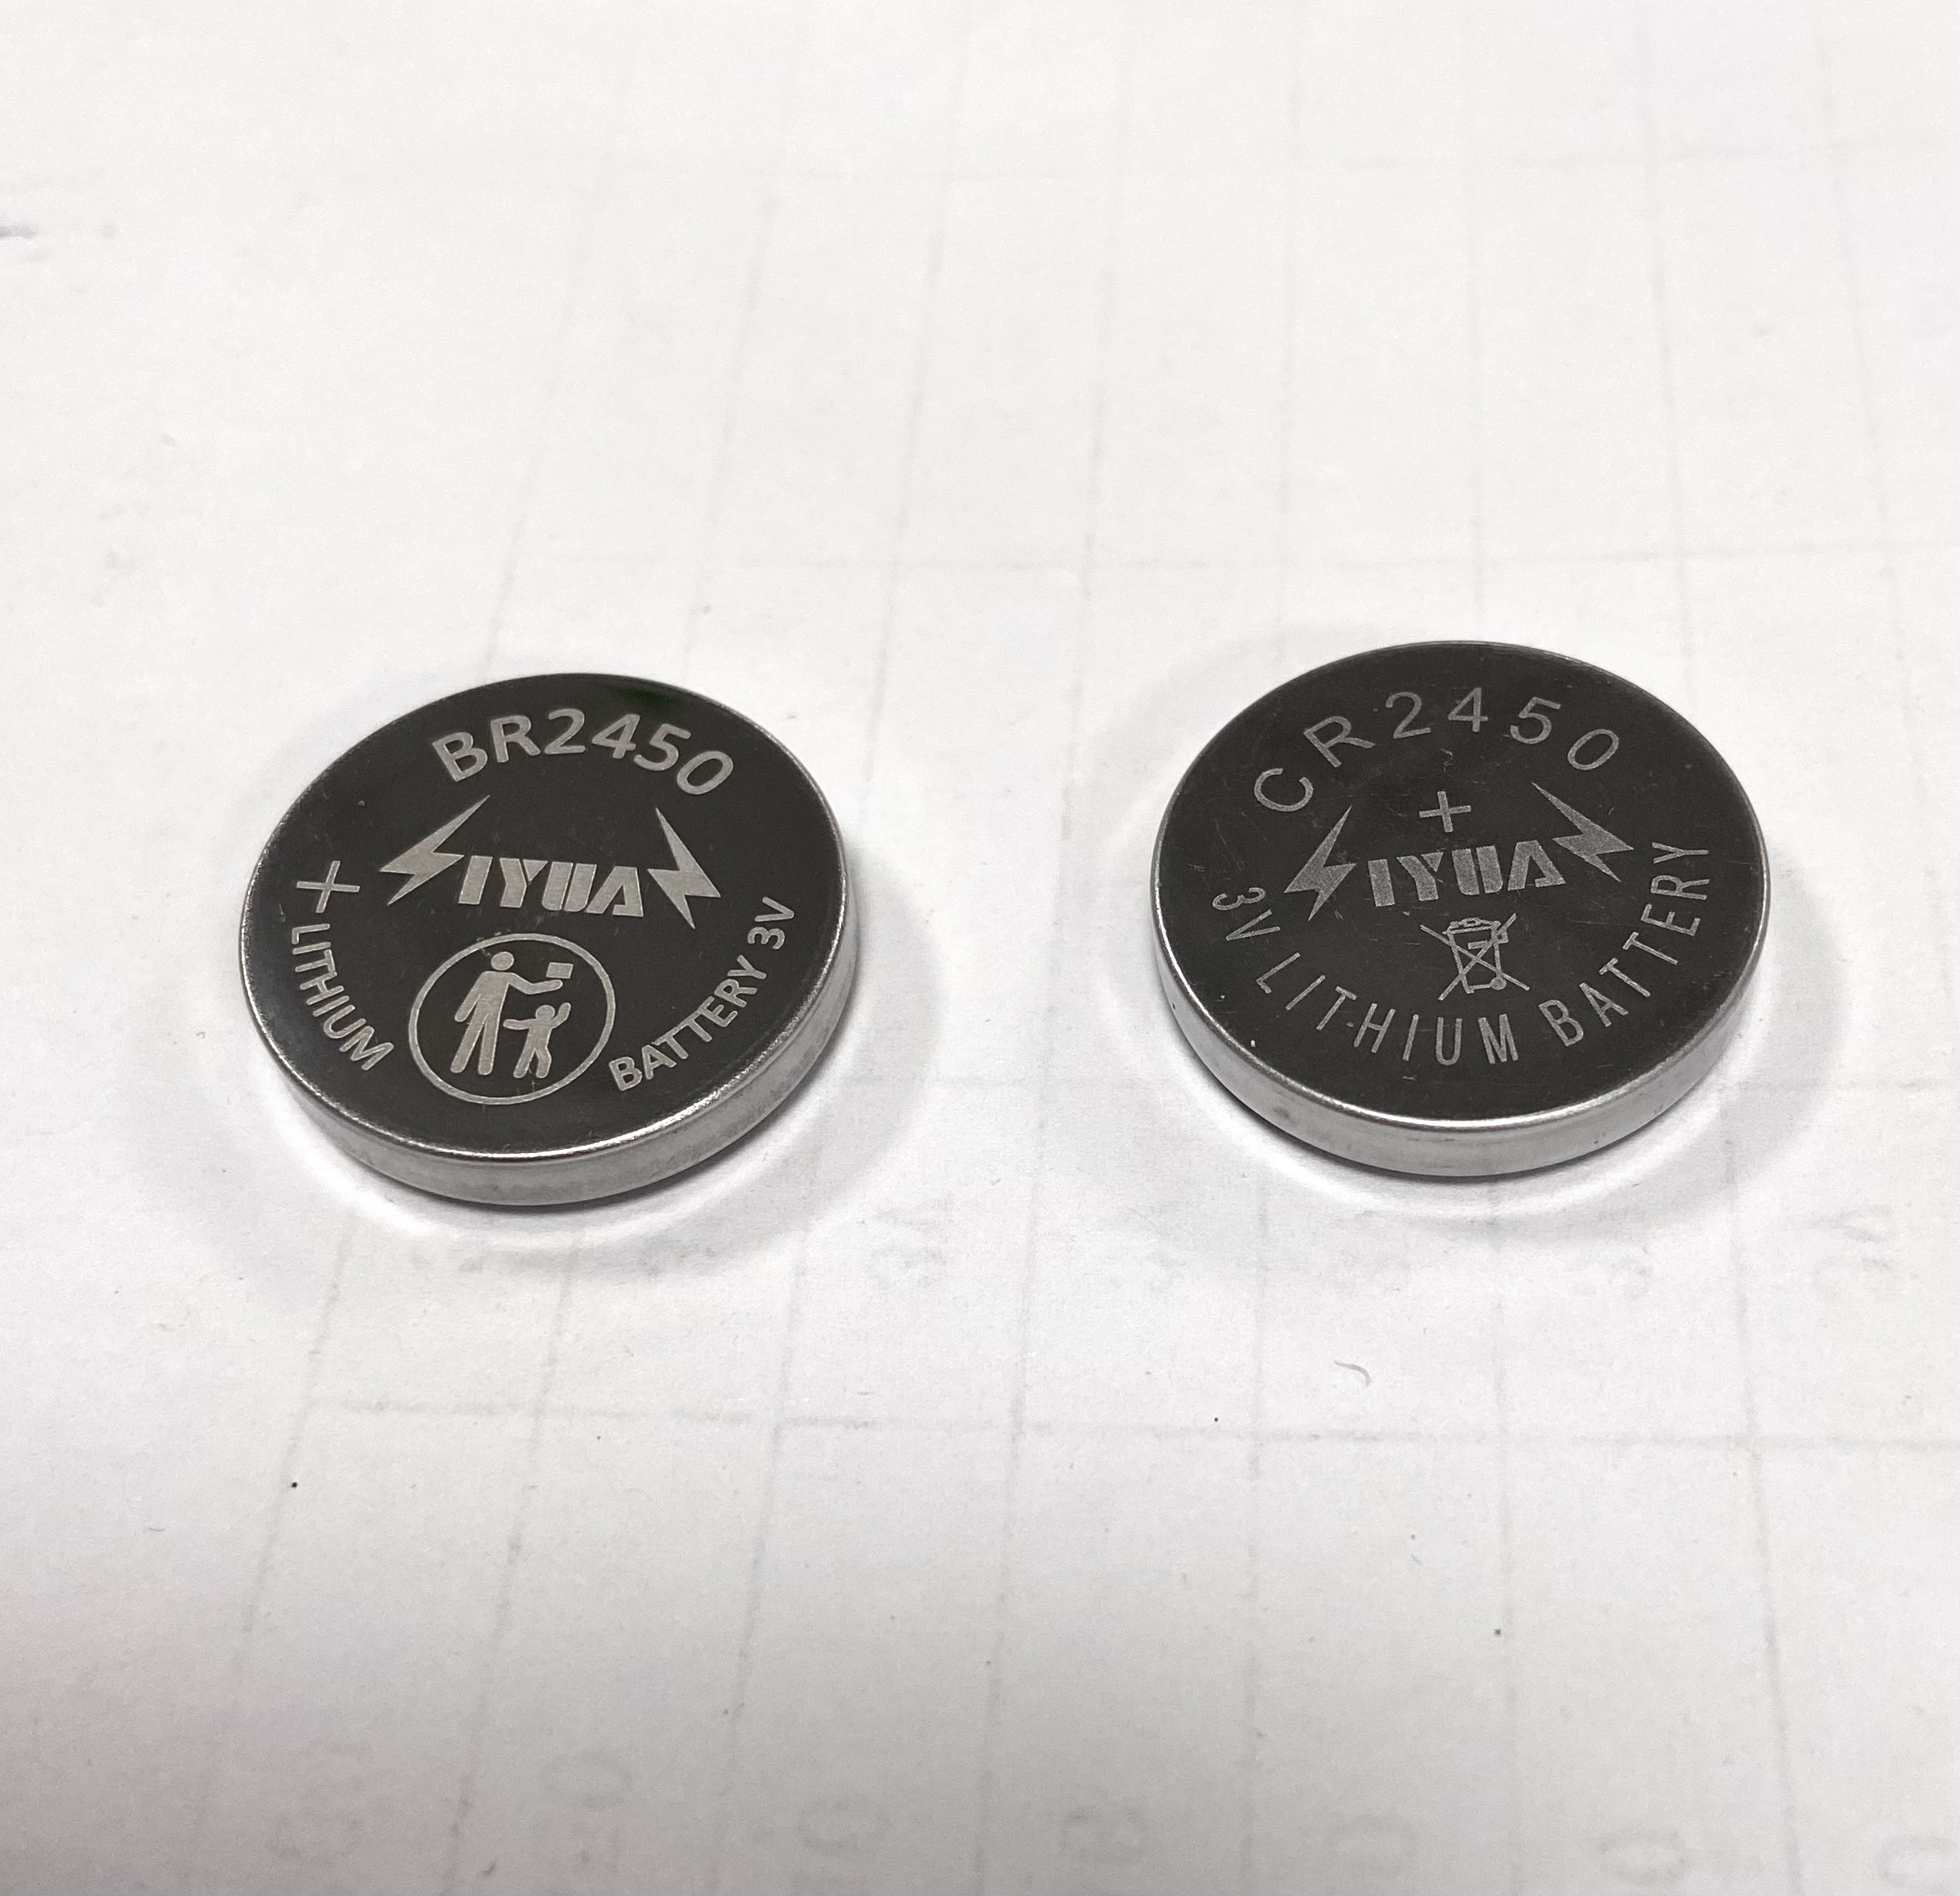 -40+125 degrees Celsius high and low temperature button cell BR2450